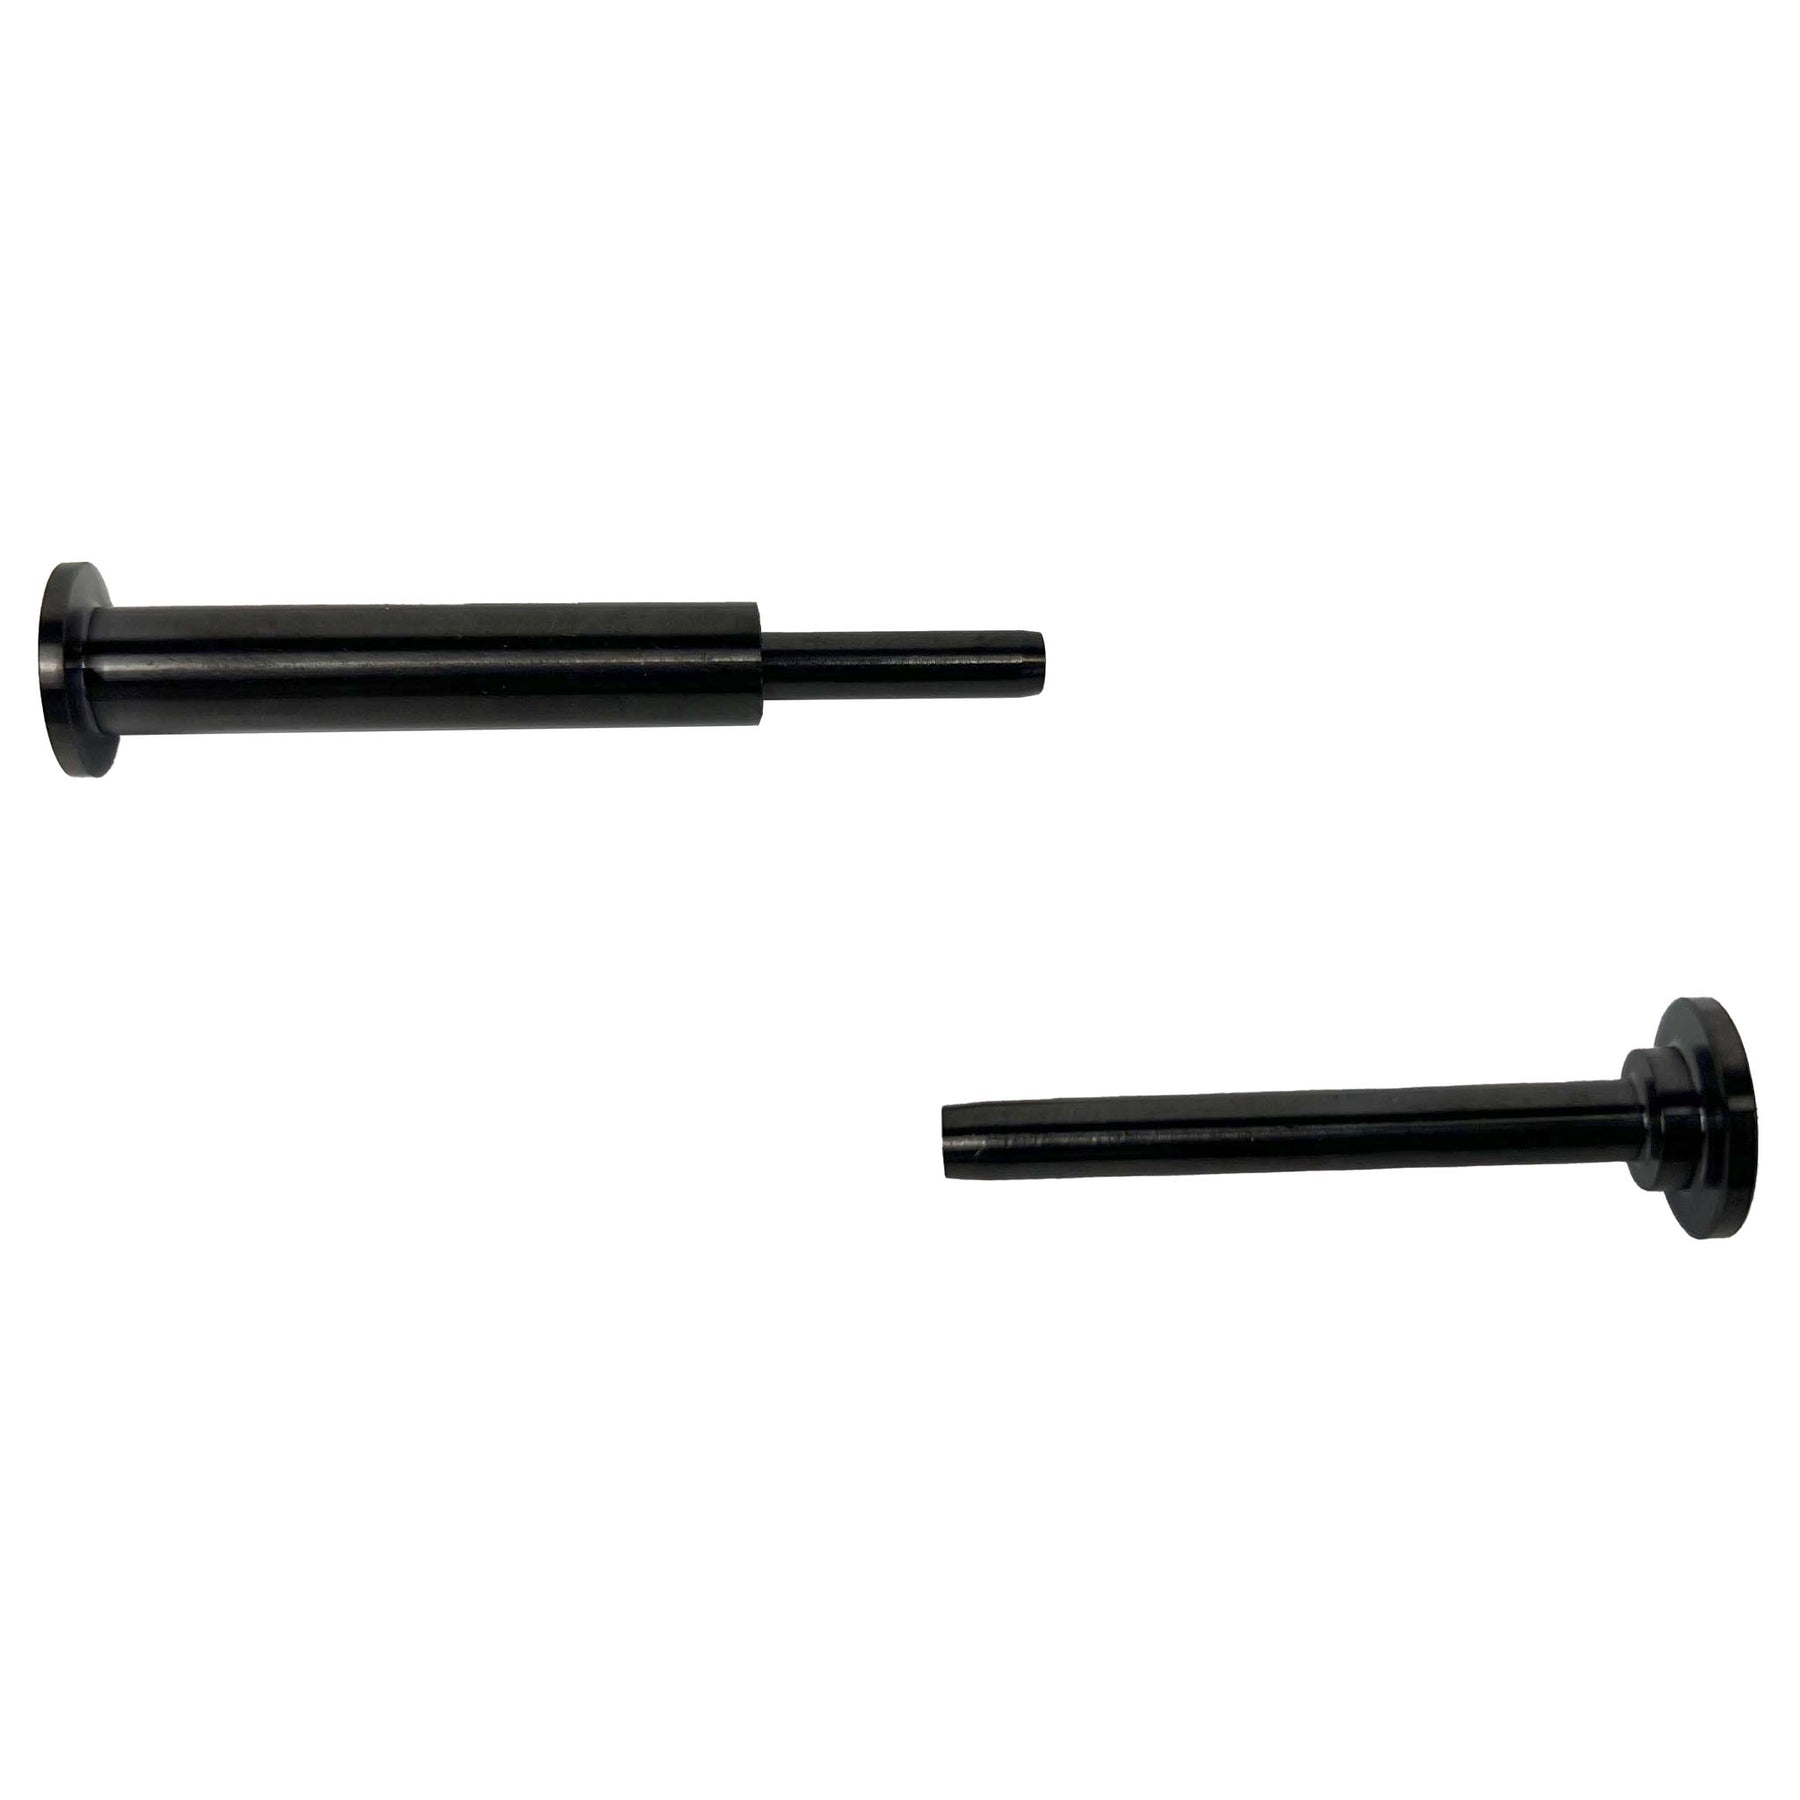 STLX-CC003 1/8" Cable Hardware Kit - Swage Tensioner and Terminal End